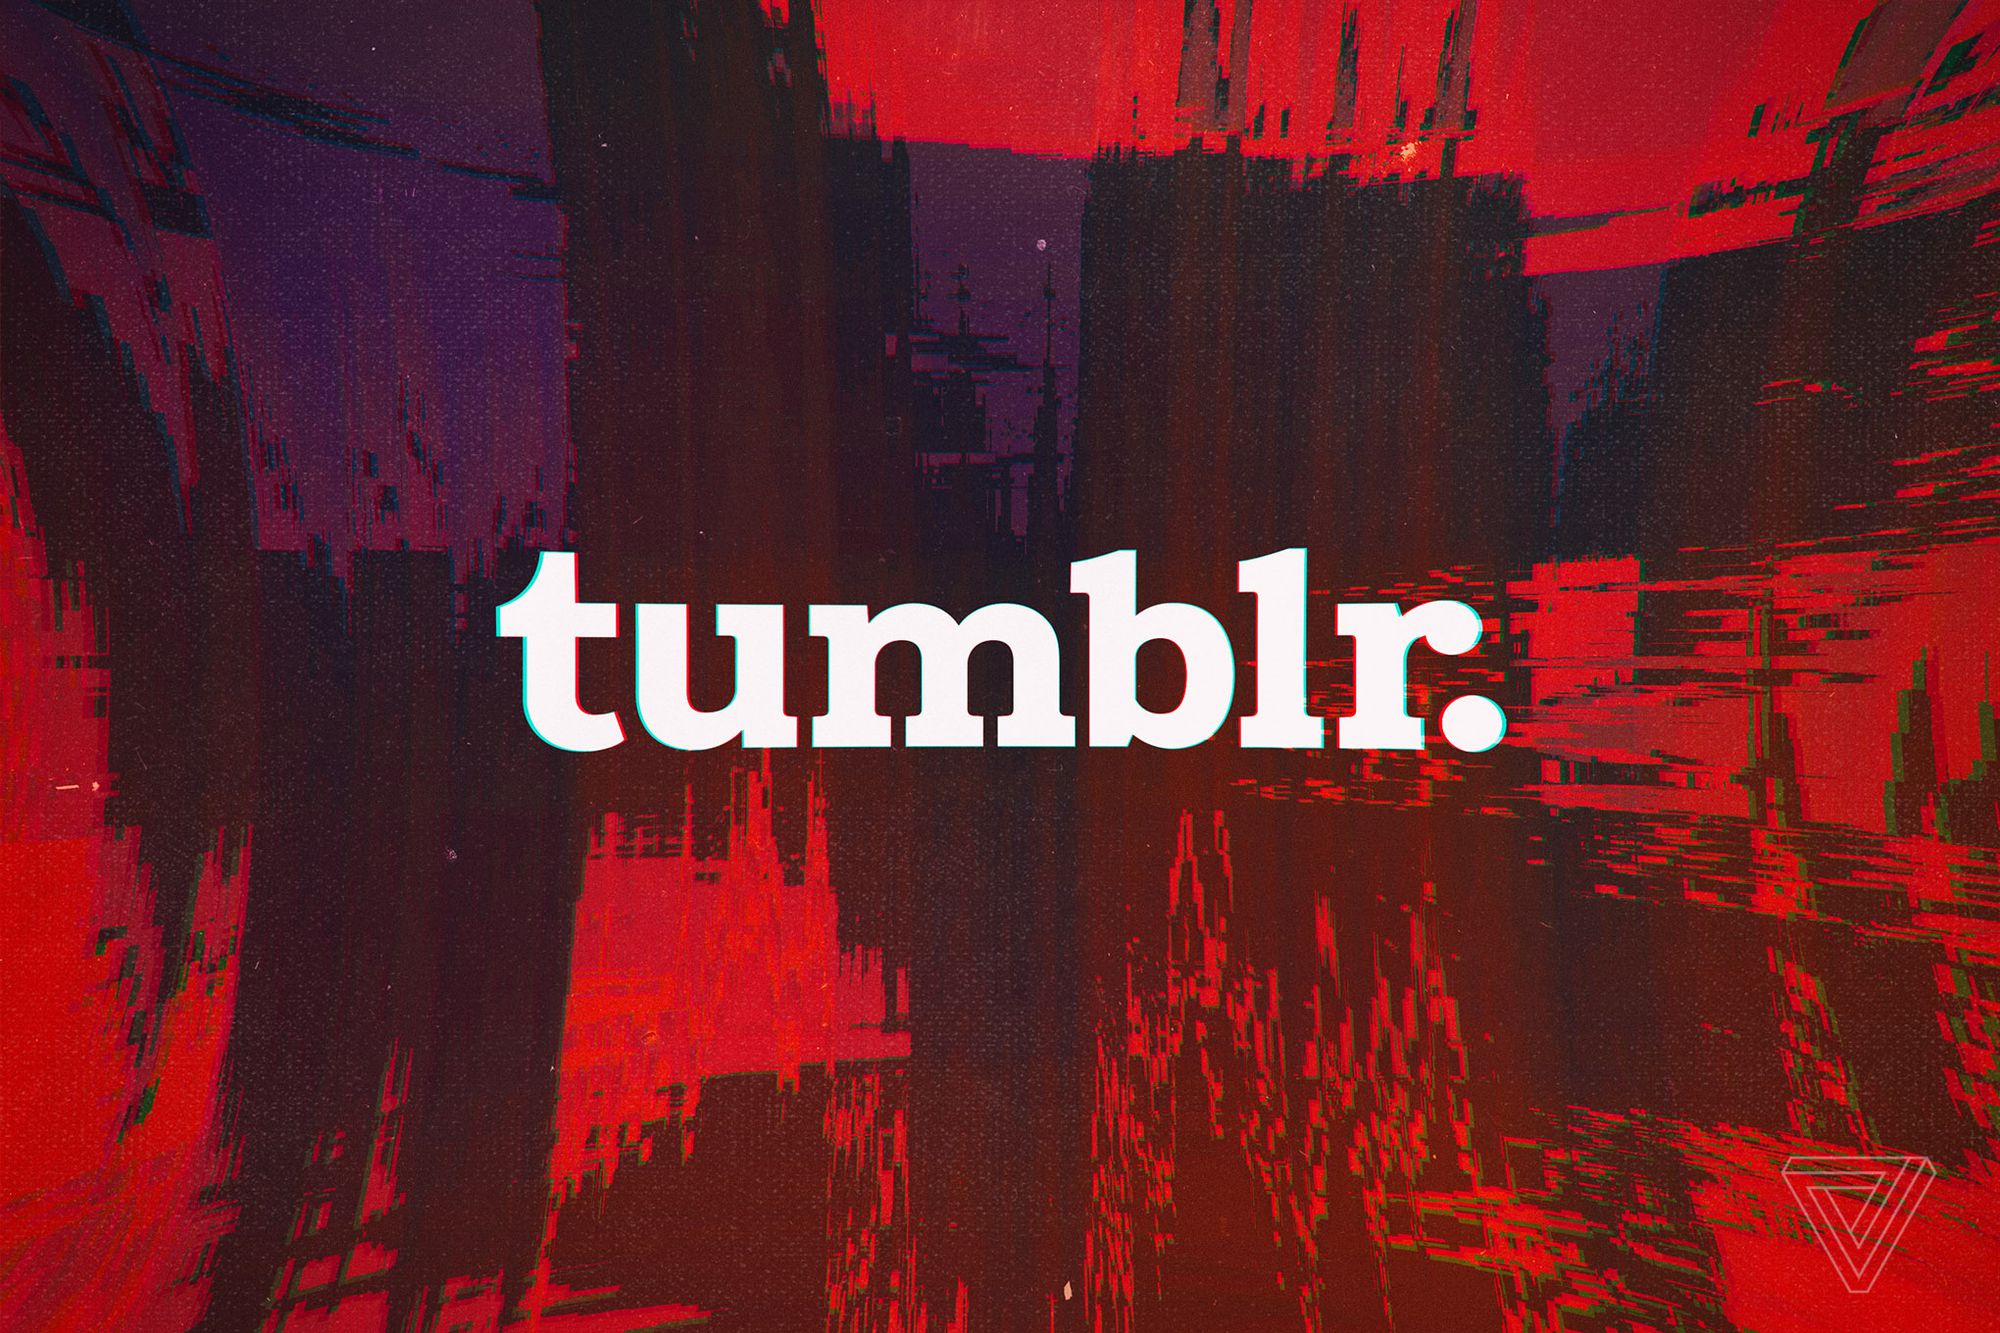 ainie yahya recommends new york porn tumblr pic